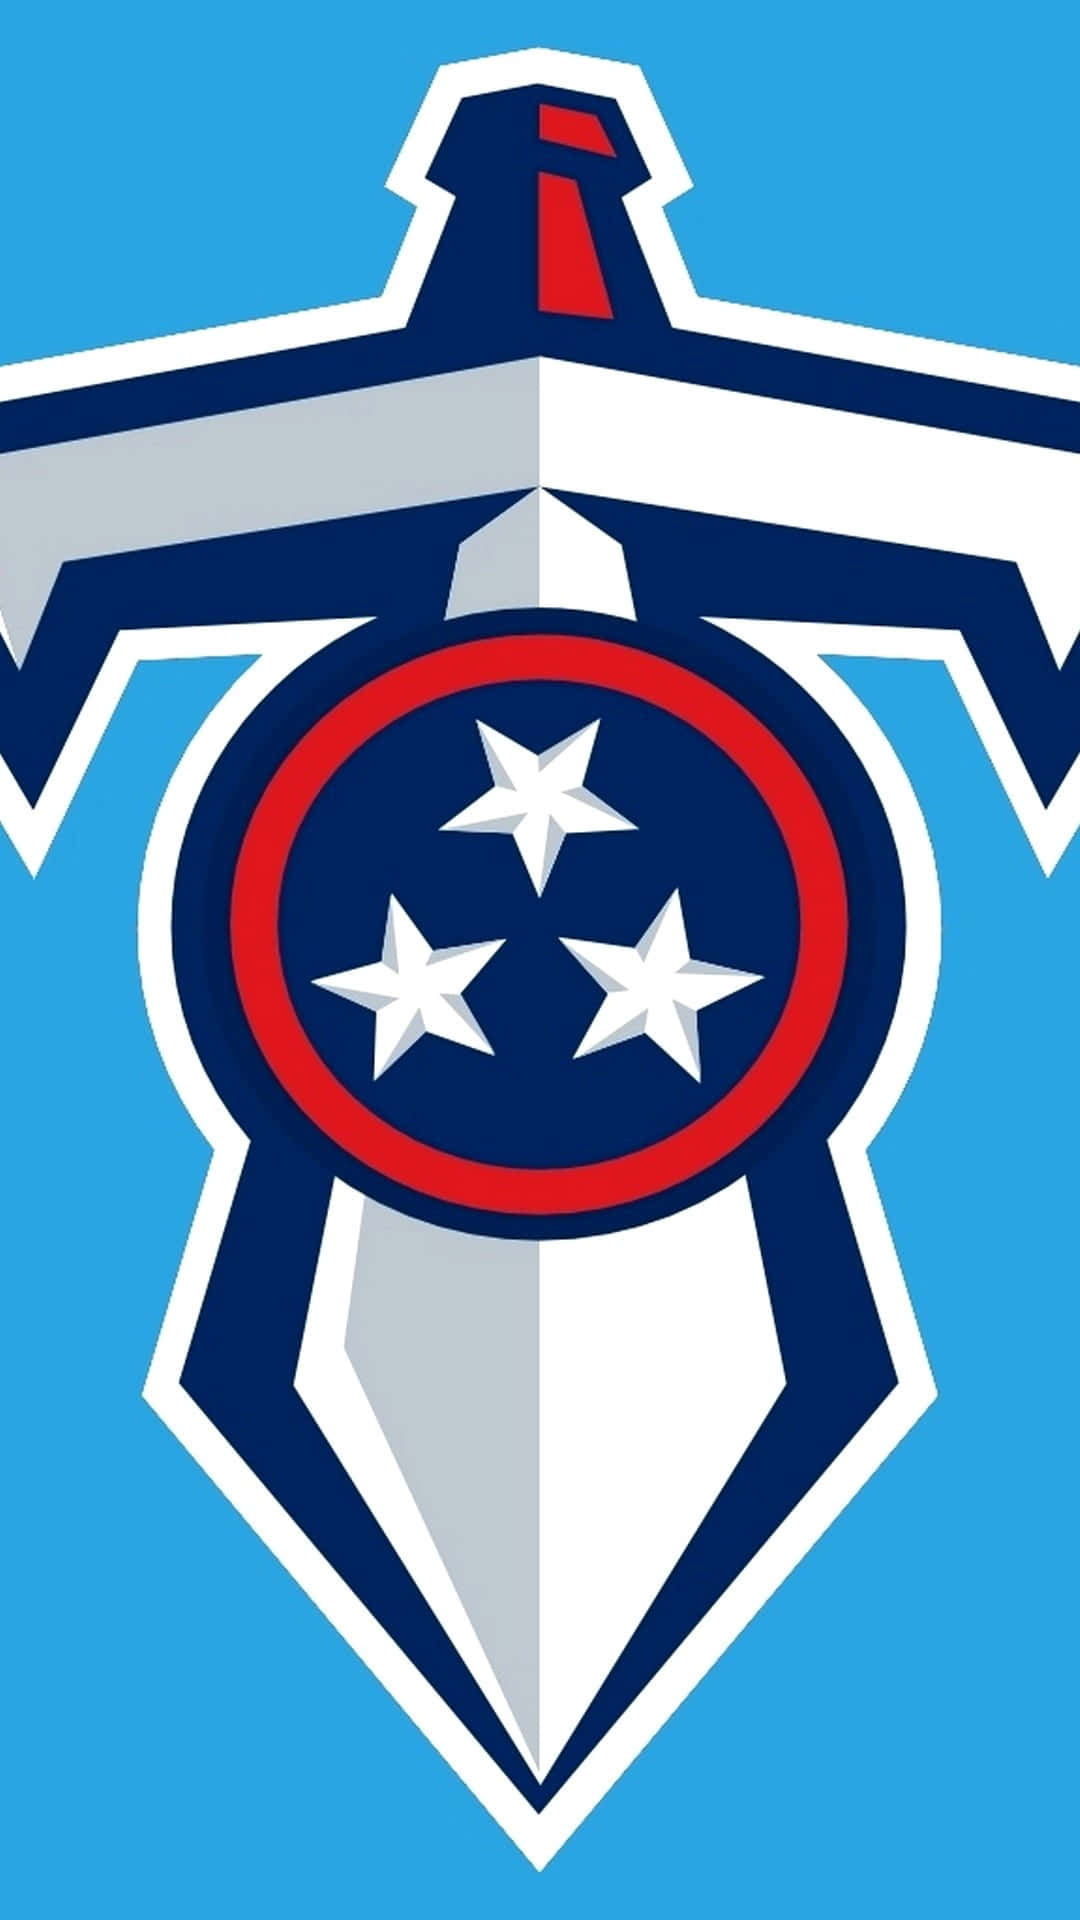 The Iconic Tn Titans Logo on an Iphone Wallpaper